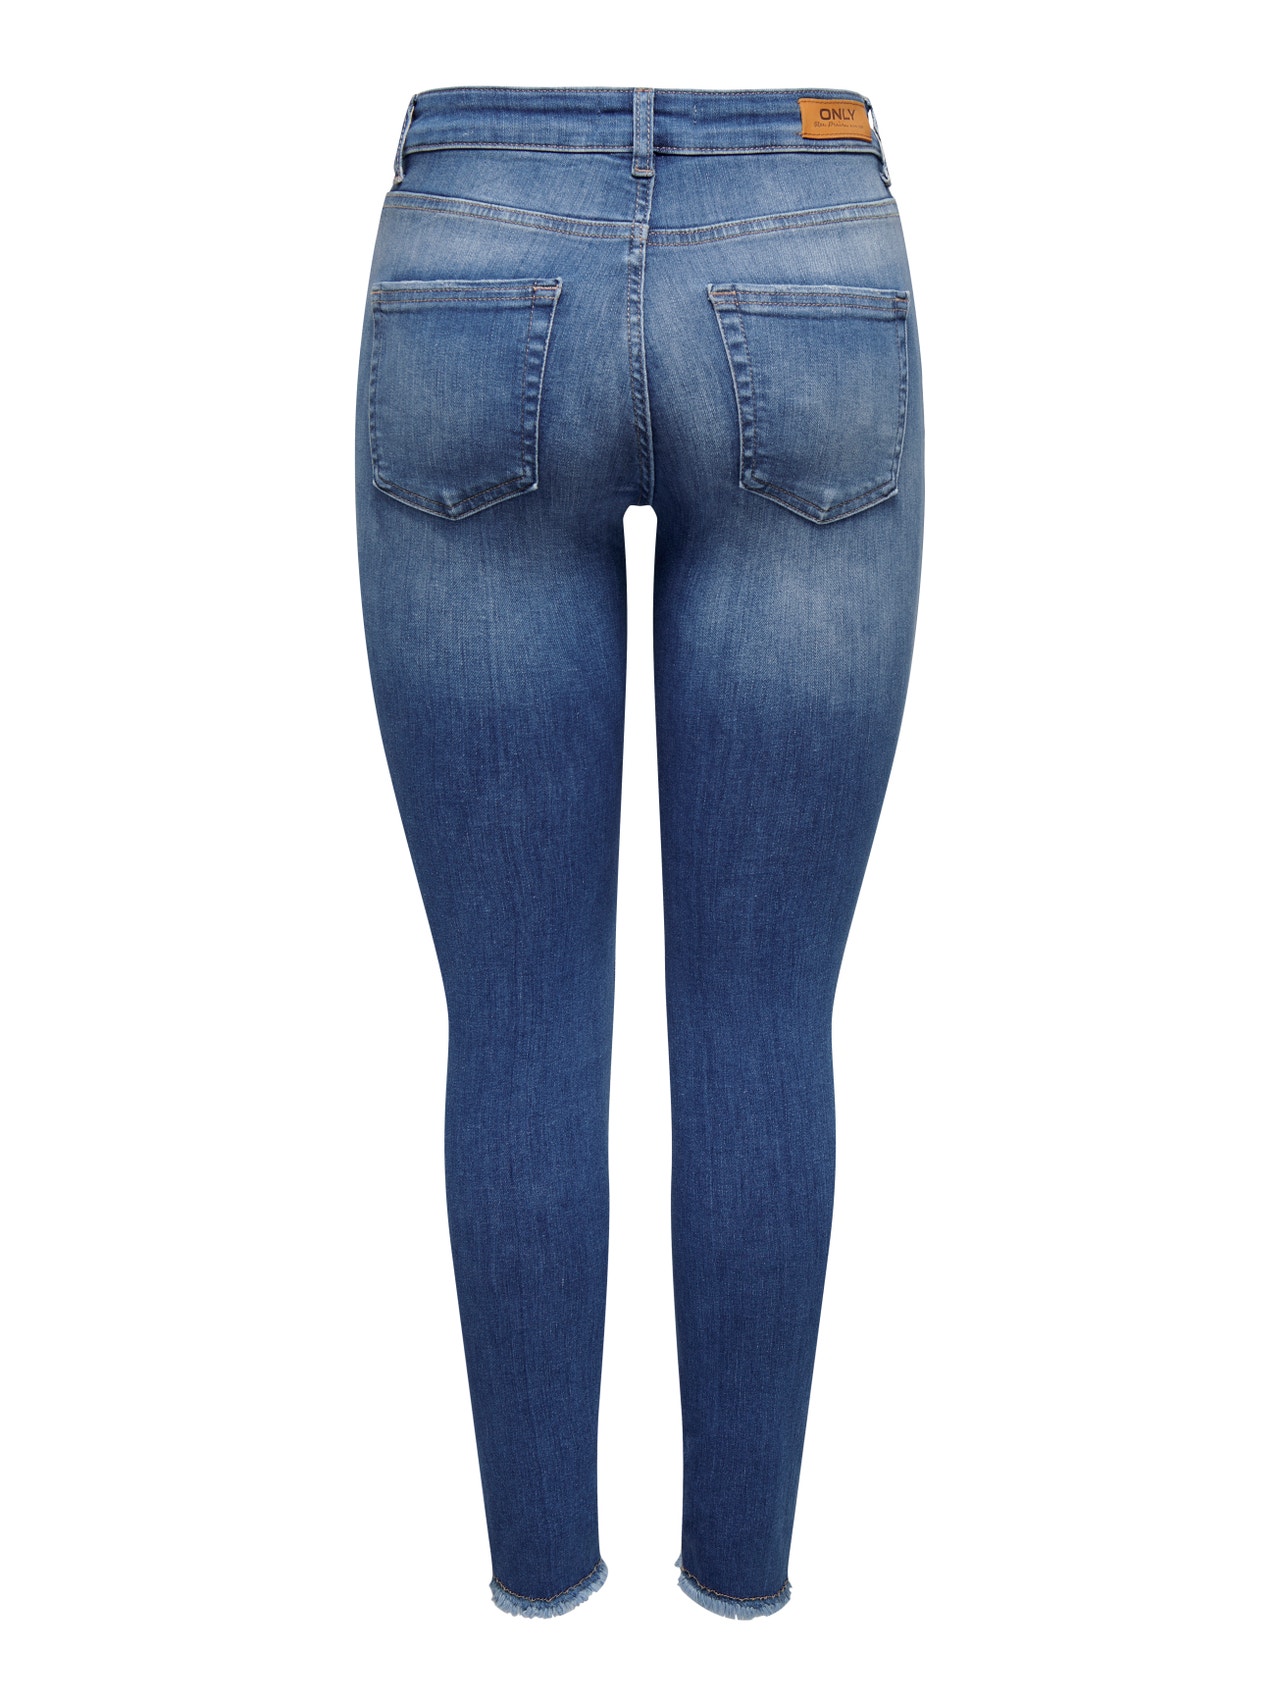 ONLY Jeans Skinny Fit Taille moyenne Ourlet brut -Medium Blue Denim - 15282335